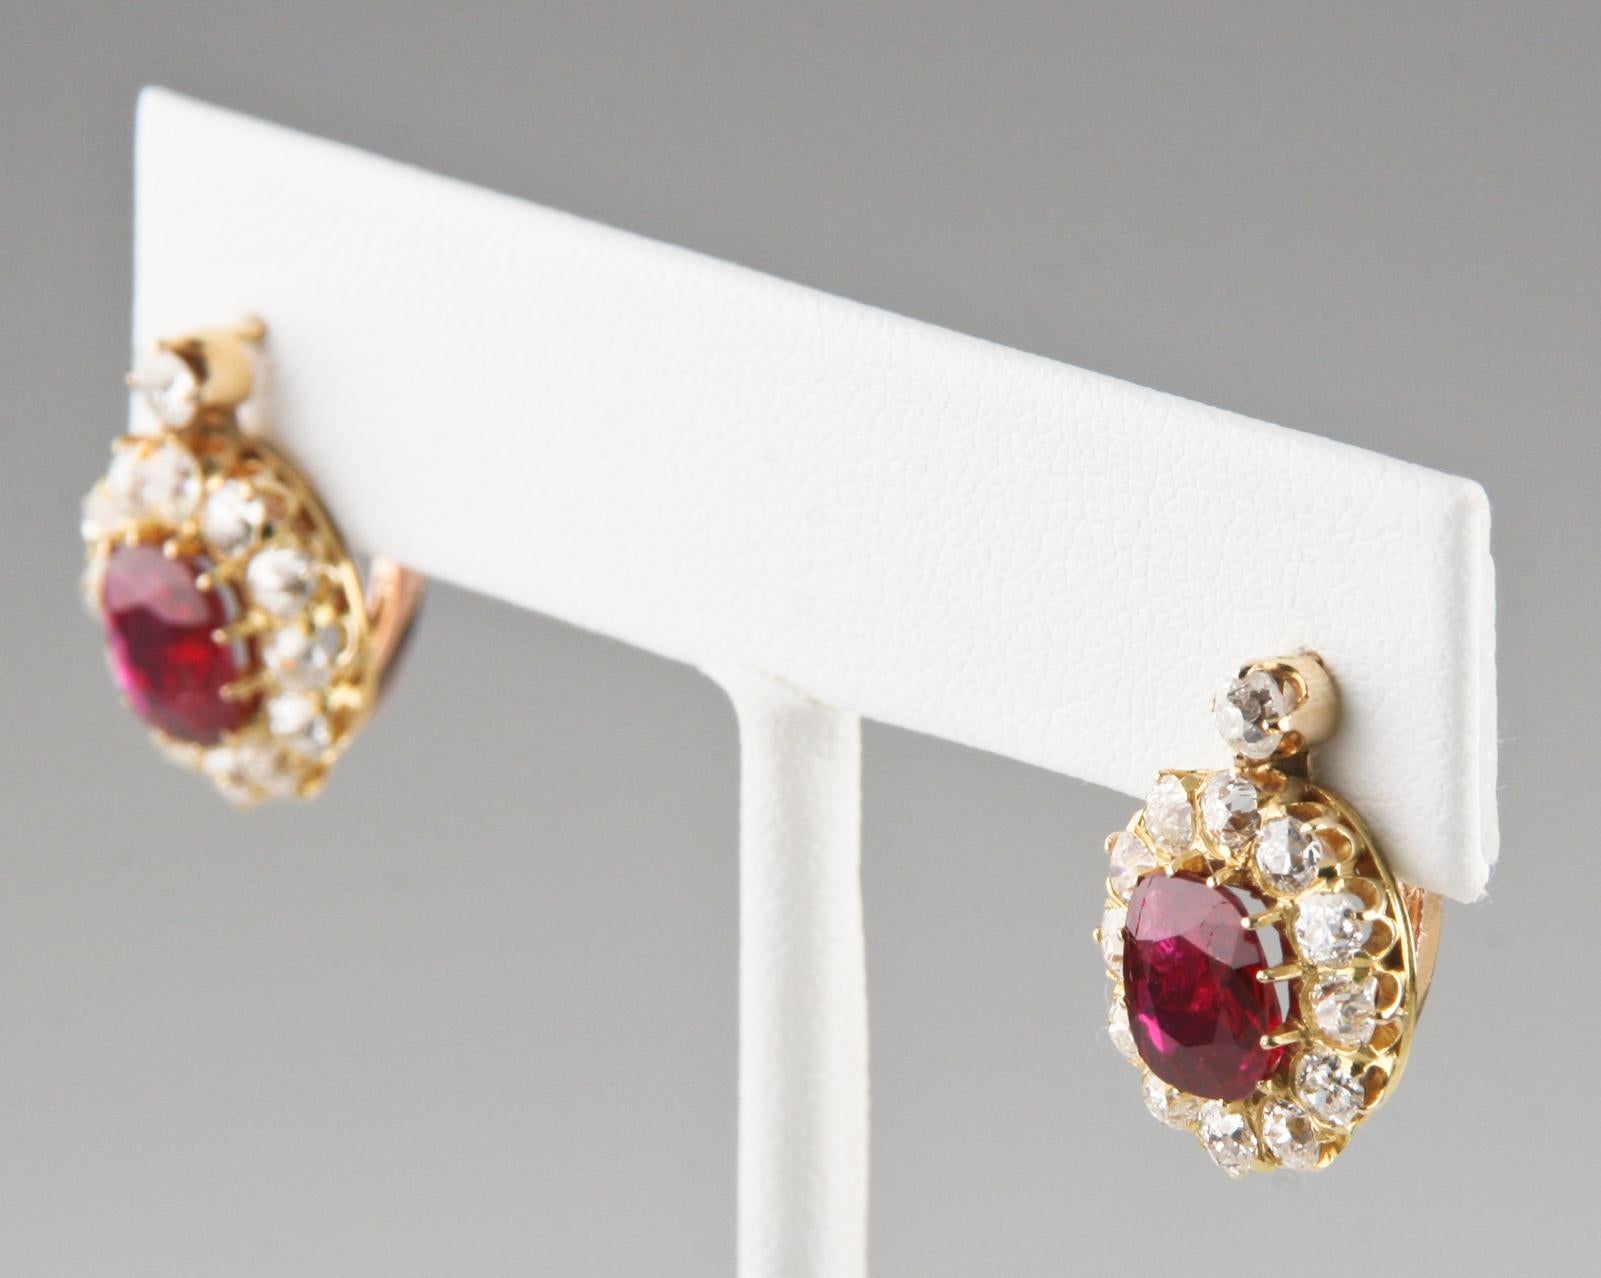 Gorgeous 18k Yellow Gold Drop Earrings Feature Two Cushion-Cut Unaltered Rubies (TRW = 2.30 ct)
Also Feature Haloes of Round Brilliant Prong-Set Diamonds in Delicate Yellow Gold Gallery
Total Diamond Weight = 1.82 ct
Rubies are completely natural,